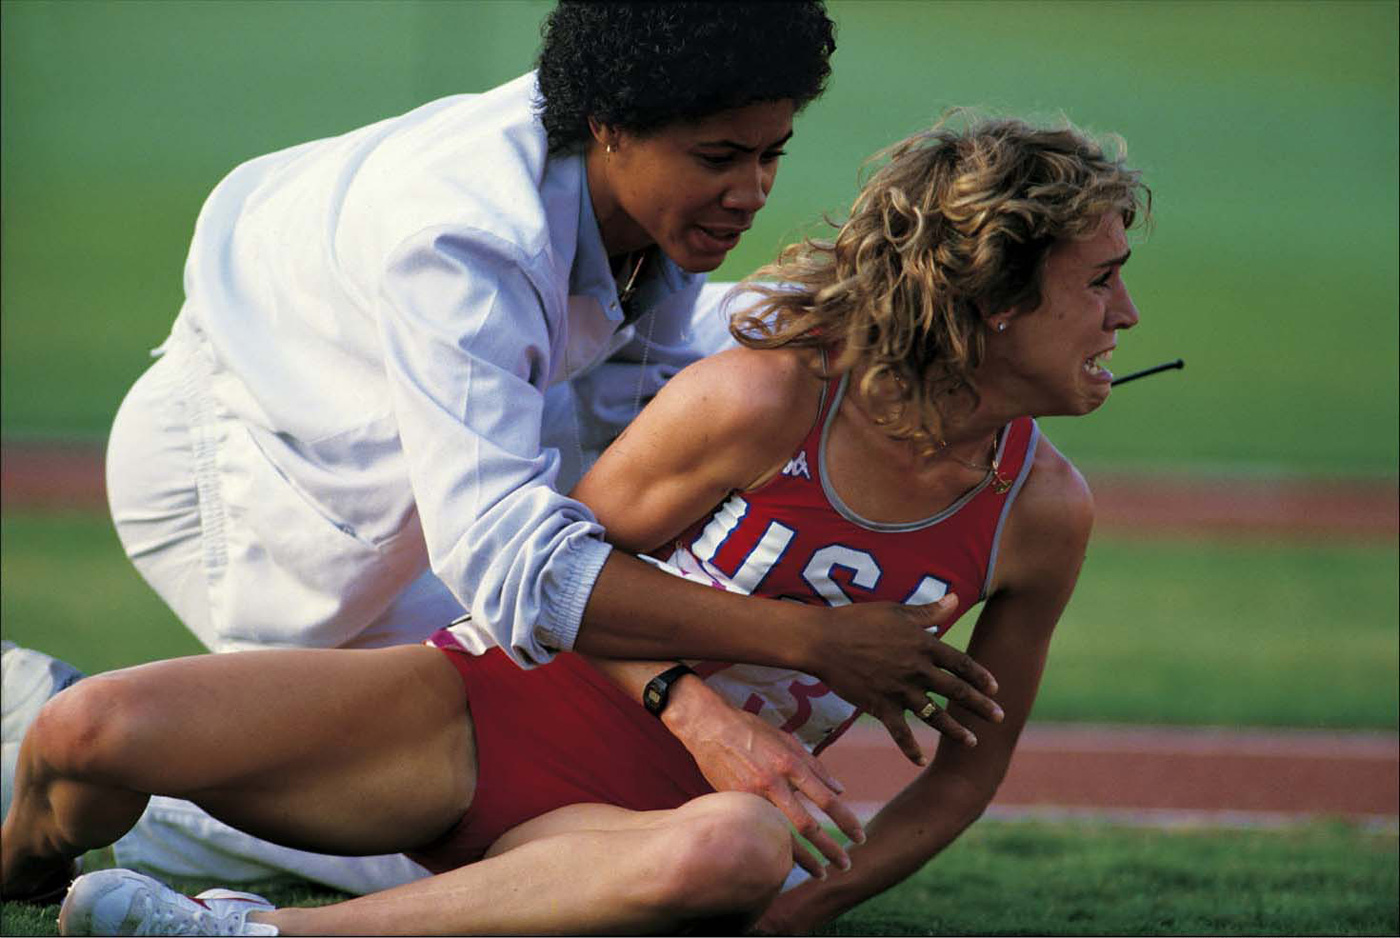 Her dreams dashed after colliding with Zola Budd, Mary Decker looks on in pain: 1984 Olympics : Classics, Old & New : David Burnett | Photographer